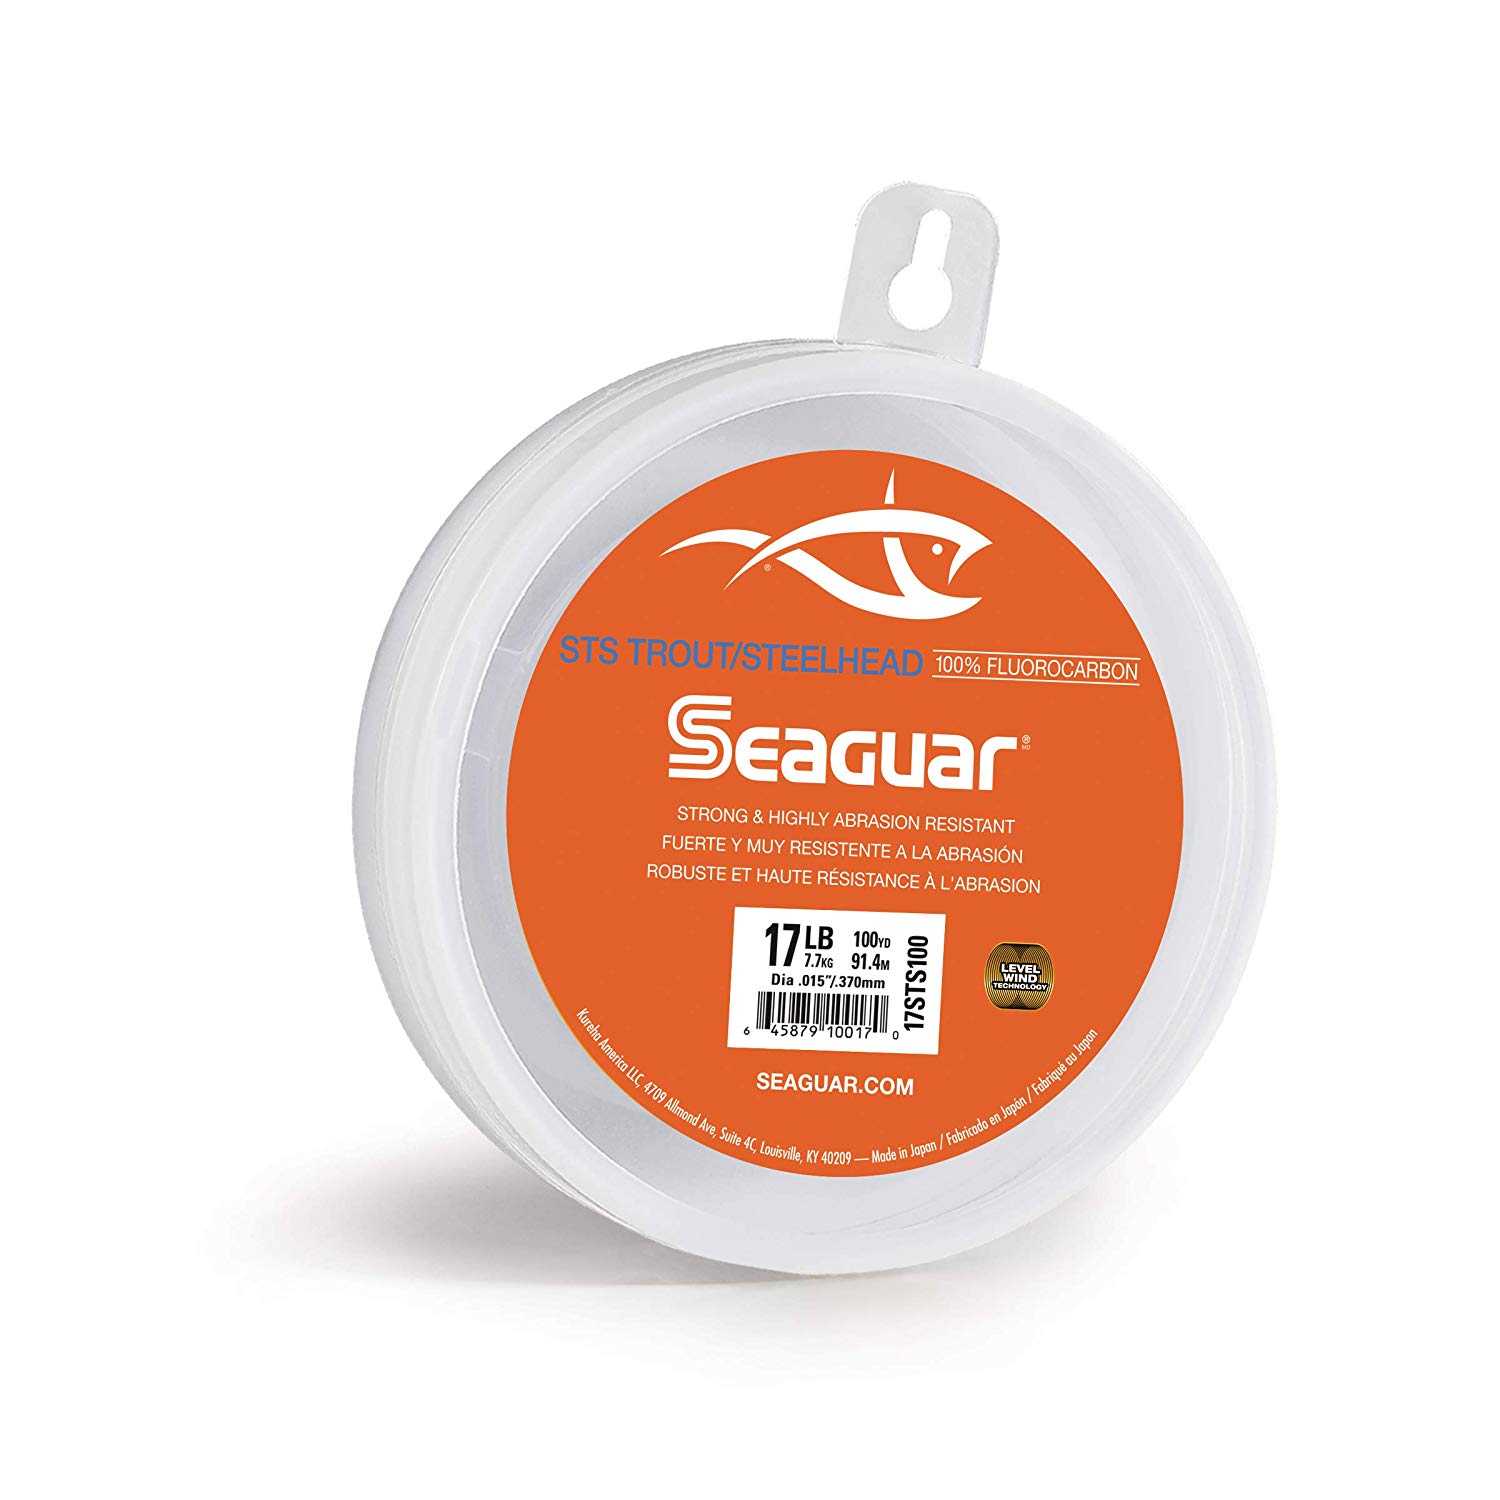 https://fishthefly.ca/wp-content/uploads/2020/02/Seaguar-STS-Trout-8lbs-Leader-Line.jpg